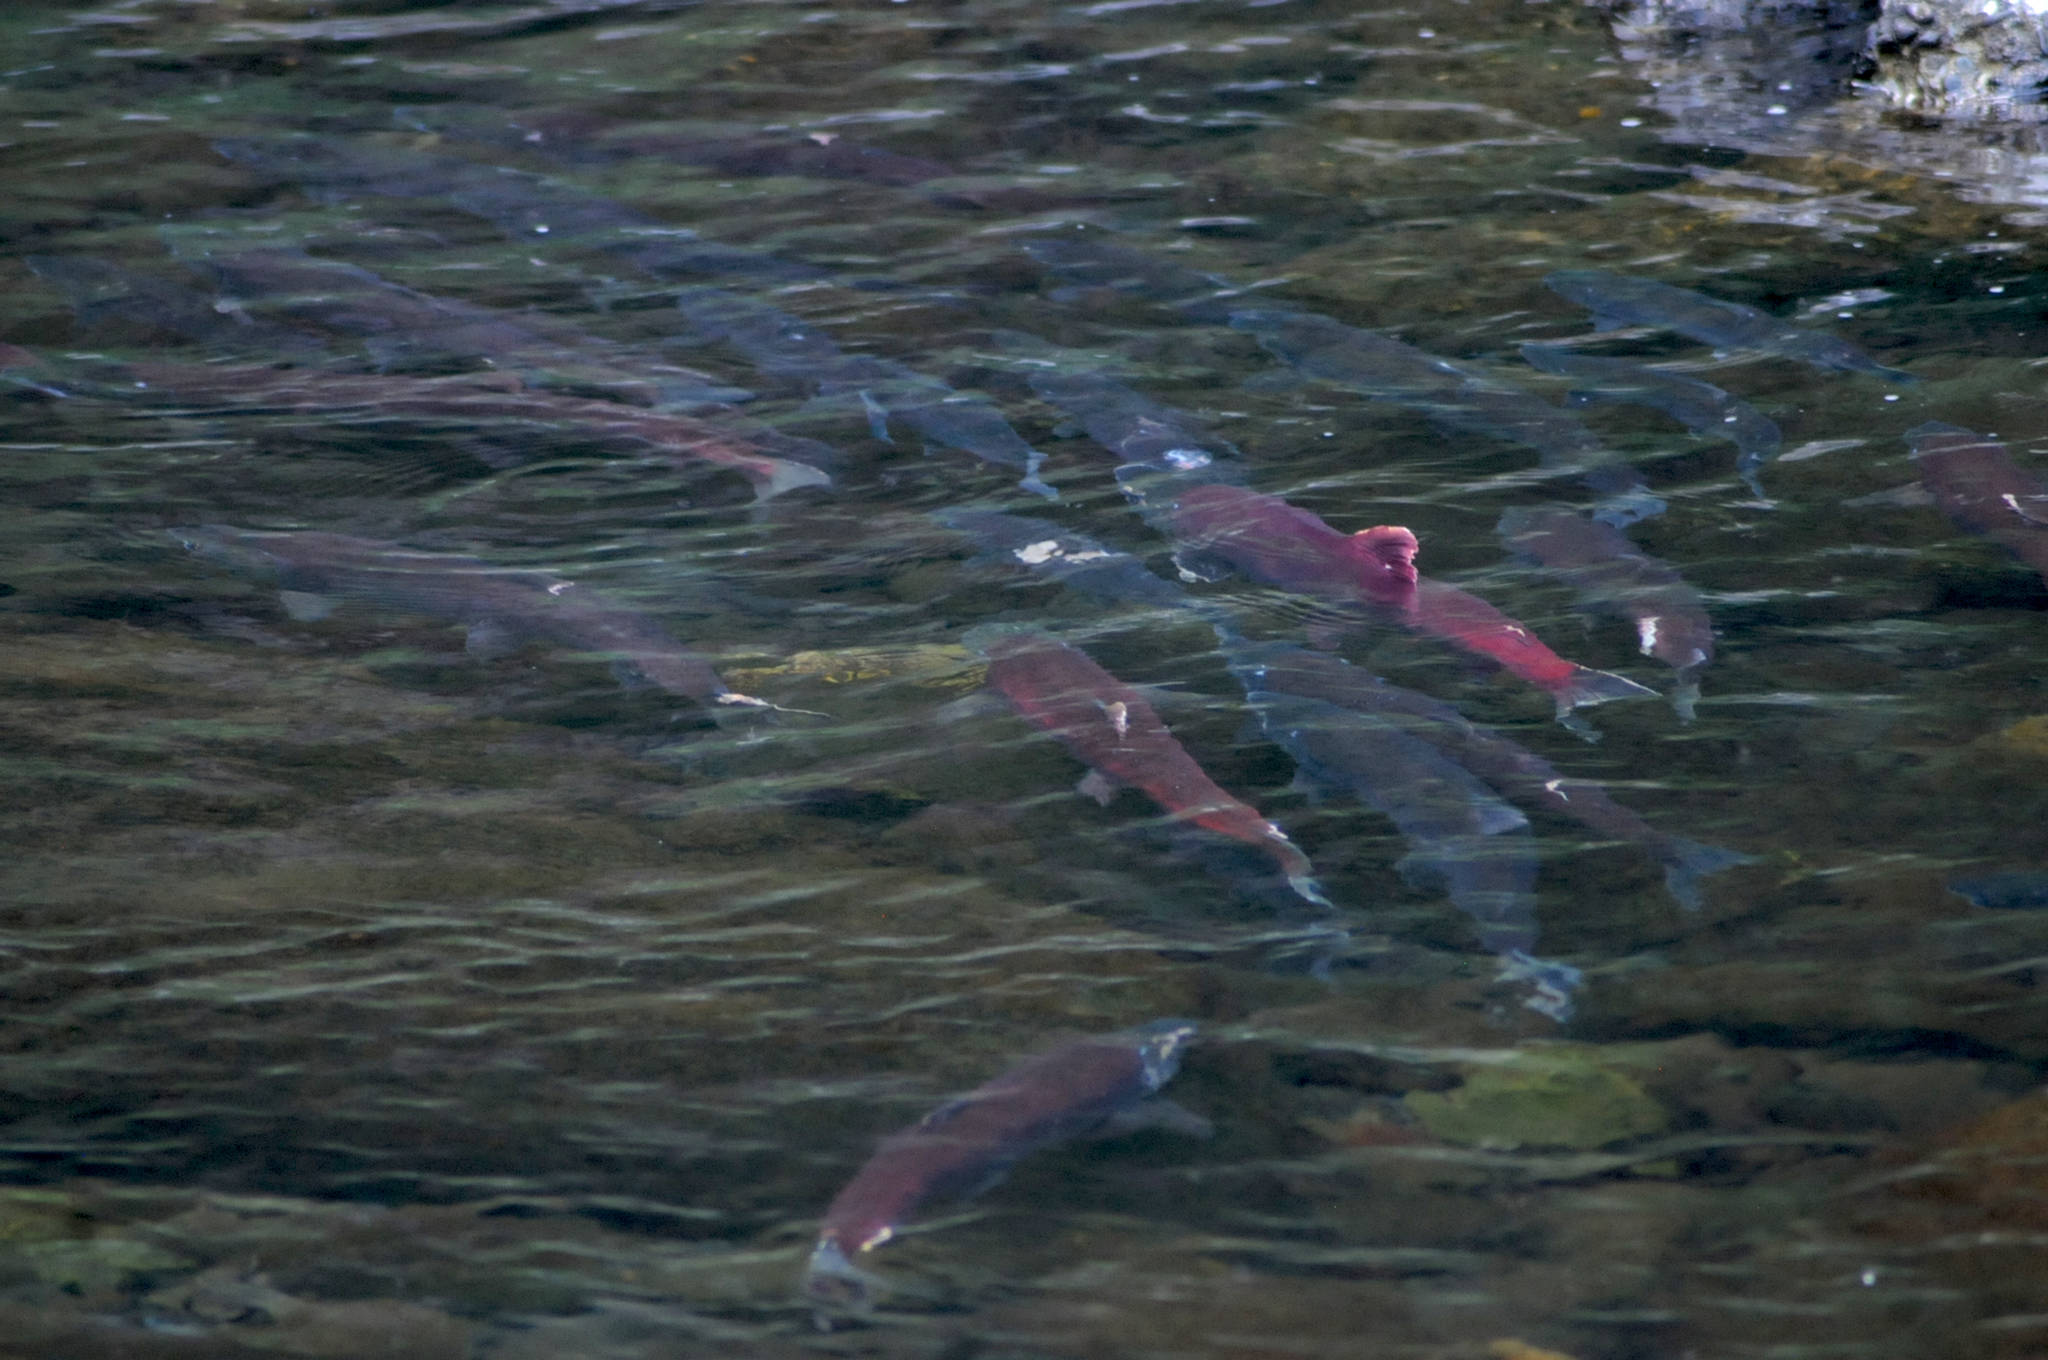 Sockeye salmon mill in the pool below the Russian River falls before pushing their way up to spawn in the upper reaches of the river on Aug. 6, 2017 near Cooper Landing, Alaska. Sockeye salmon fishing is closed for the season on the Russian River as the fish move up the system and spawn. (Photo by Elizabeth Earl/Peninsula Clarion)